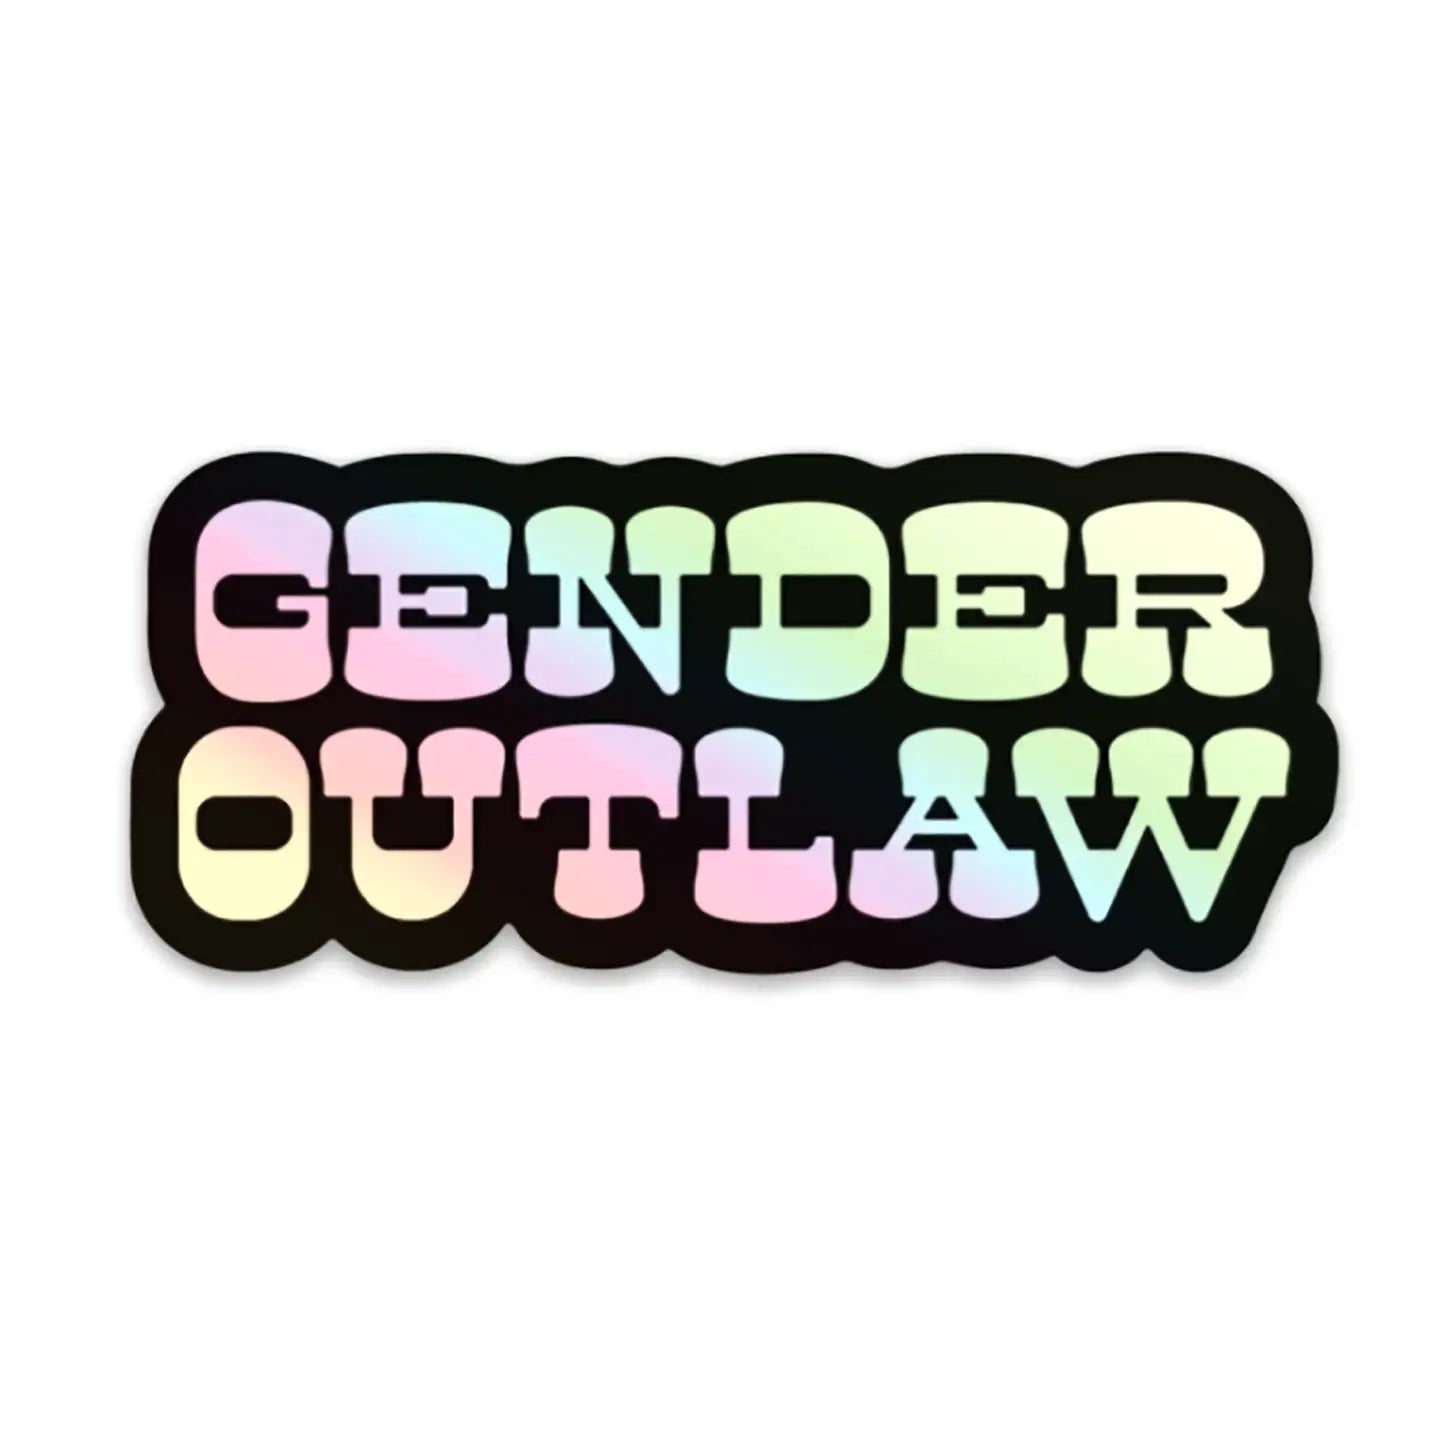 Gender Outlaw Holographic Sticker